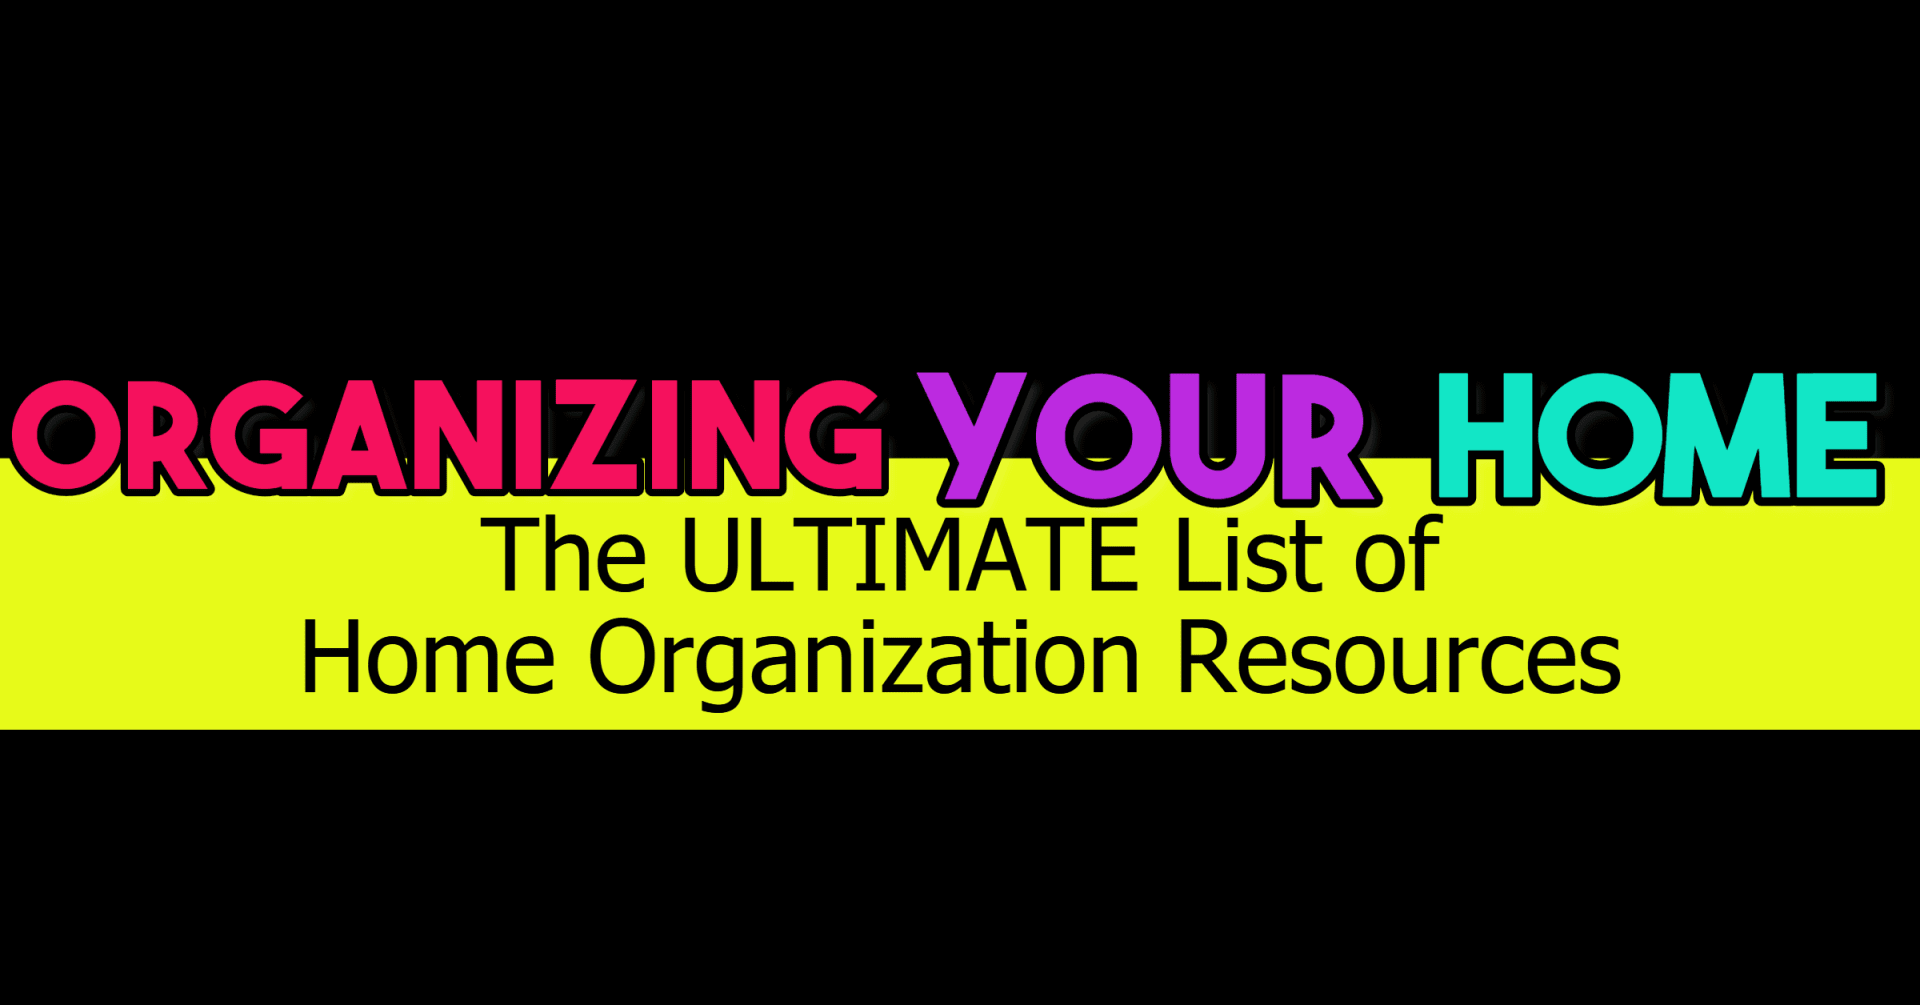 Organizing your home - the ULTIMATE list of home organization resources - mom real budget friendly cleaning tricks organizing tips diy home decor and craft ideas